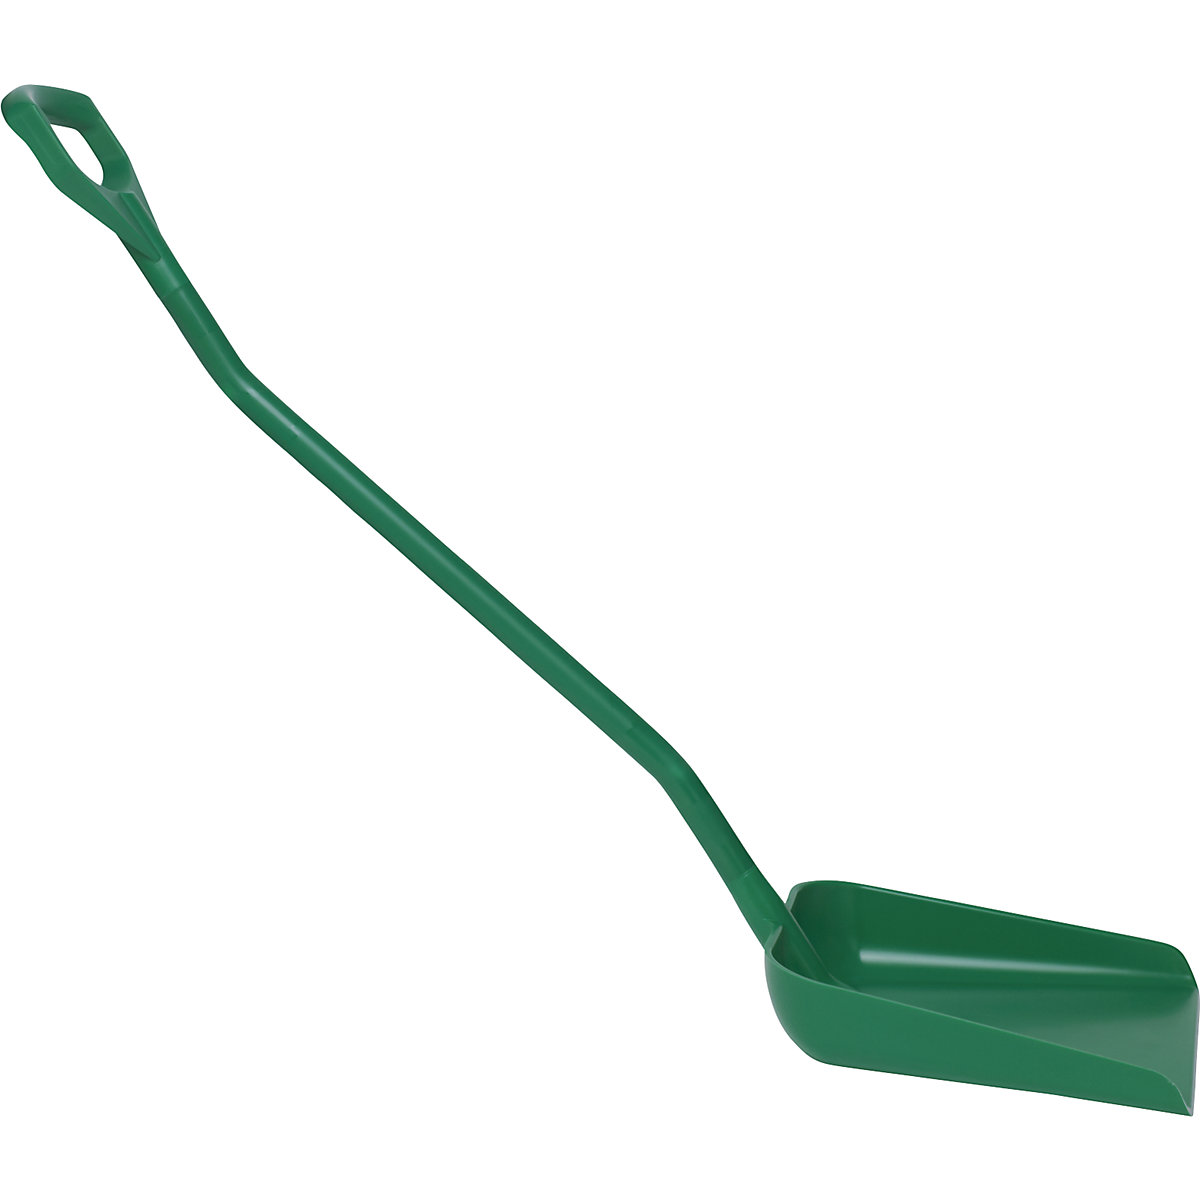 Shovel, ergonomic and suitable for foodstuffs – Vikan, overall length 1310 mm, green